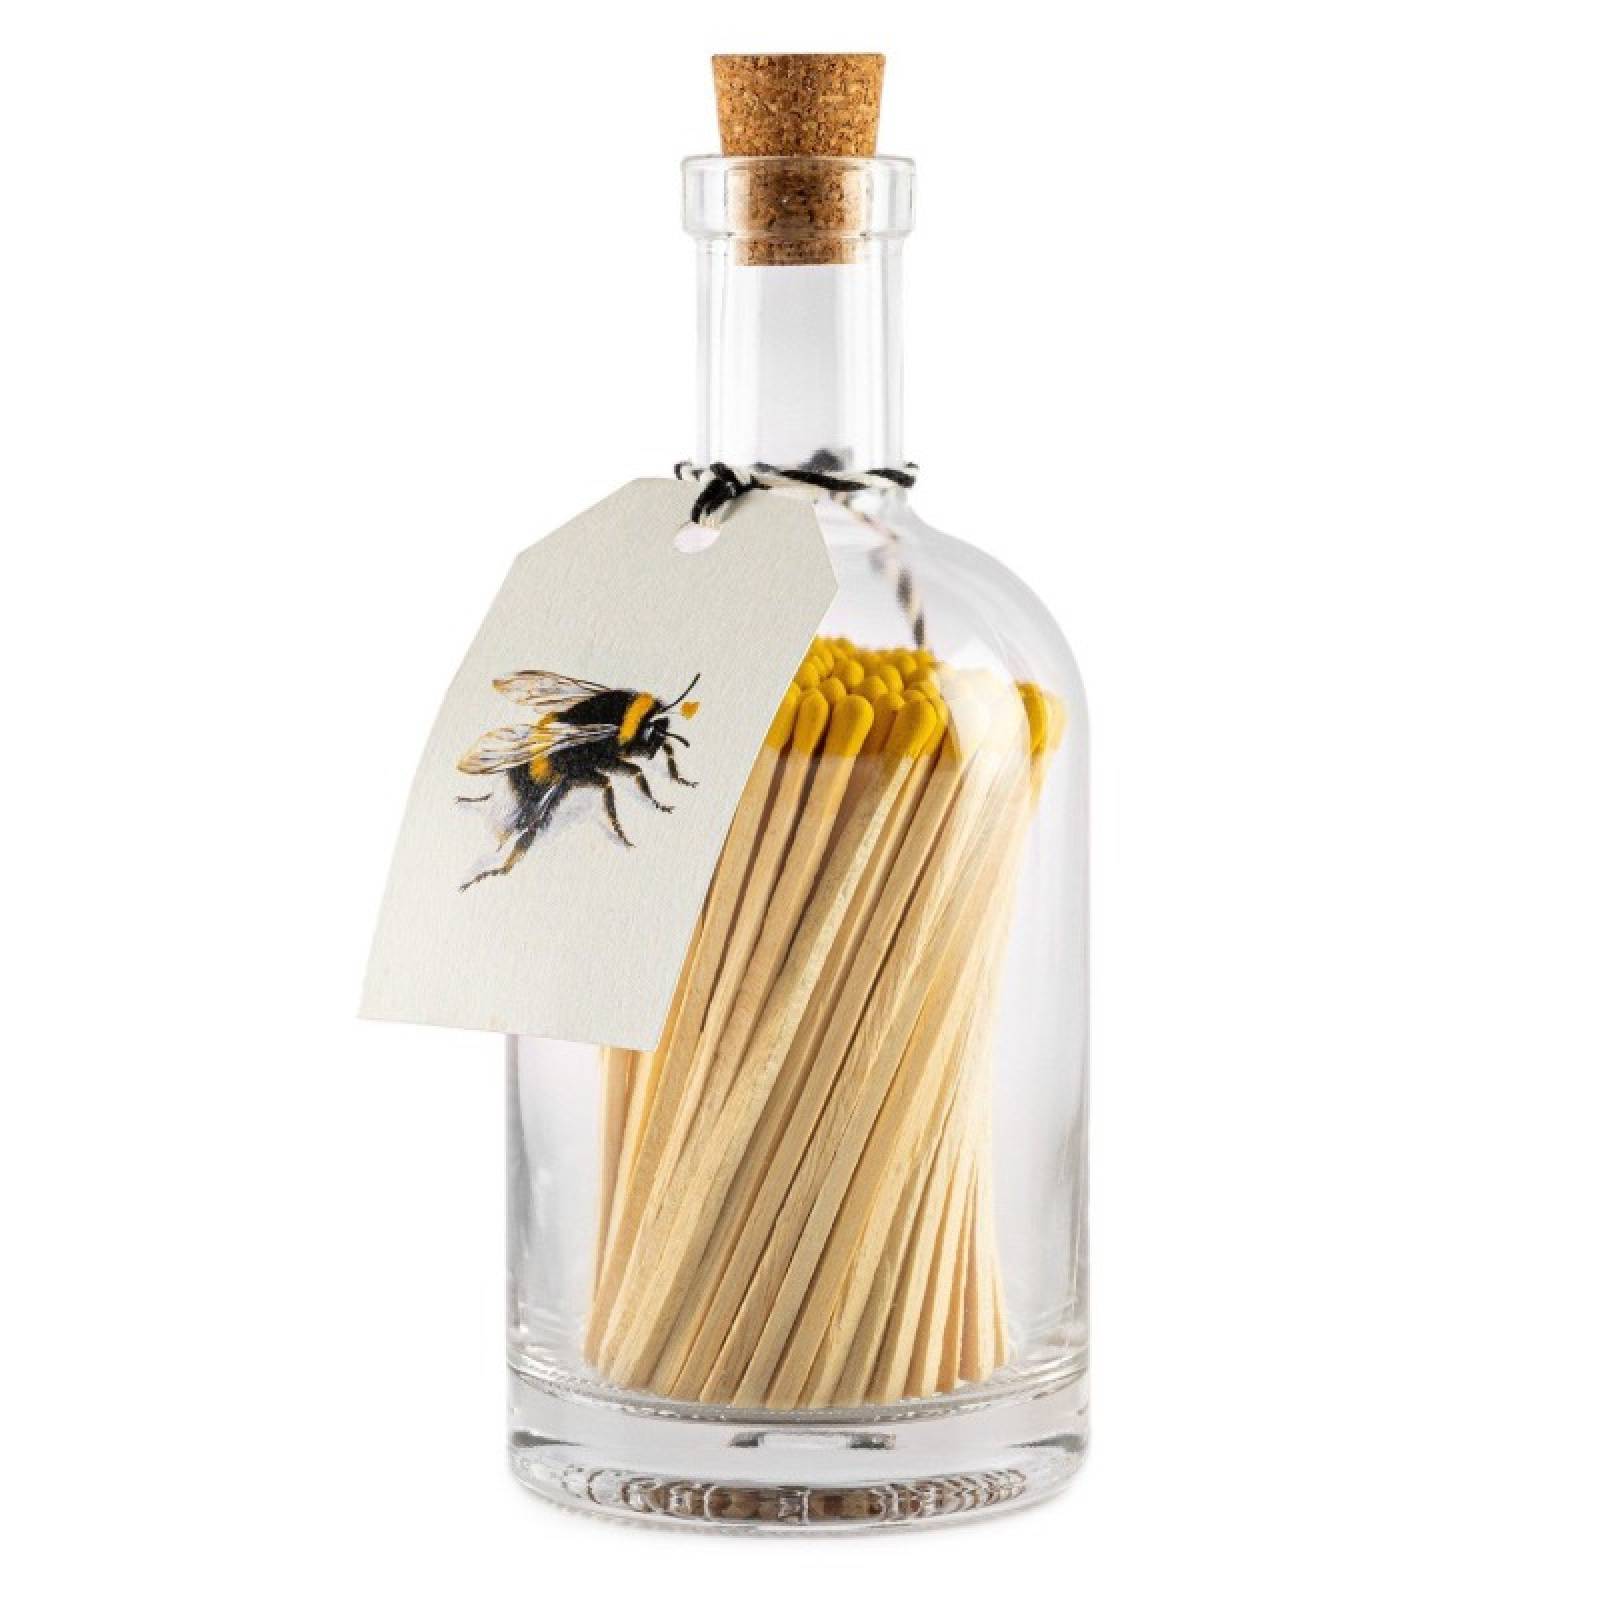 Matches In Glass Bottle - Bee